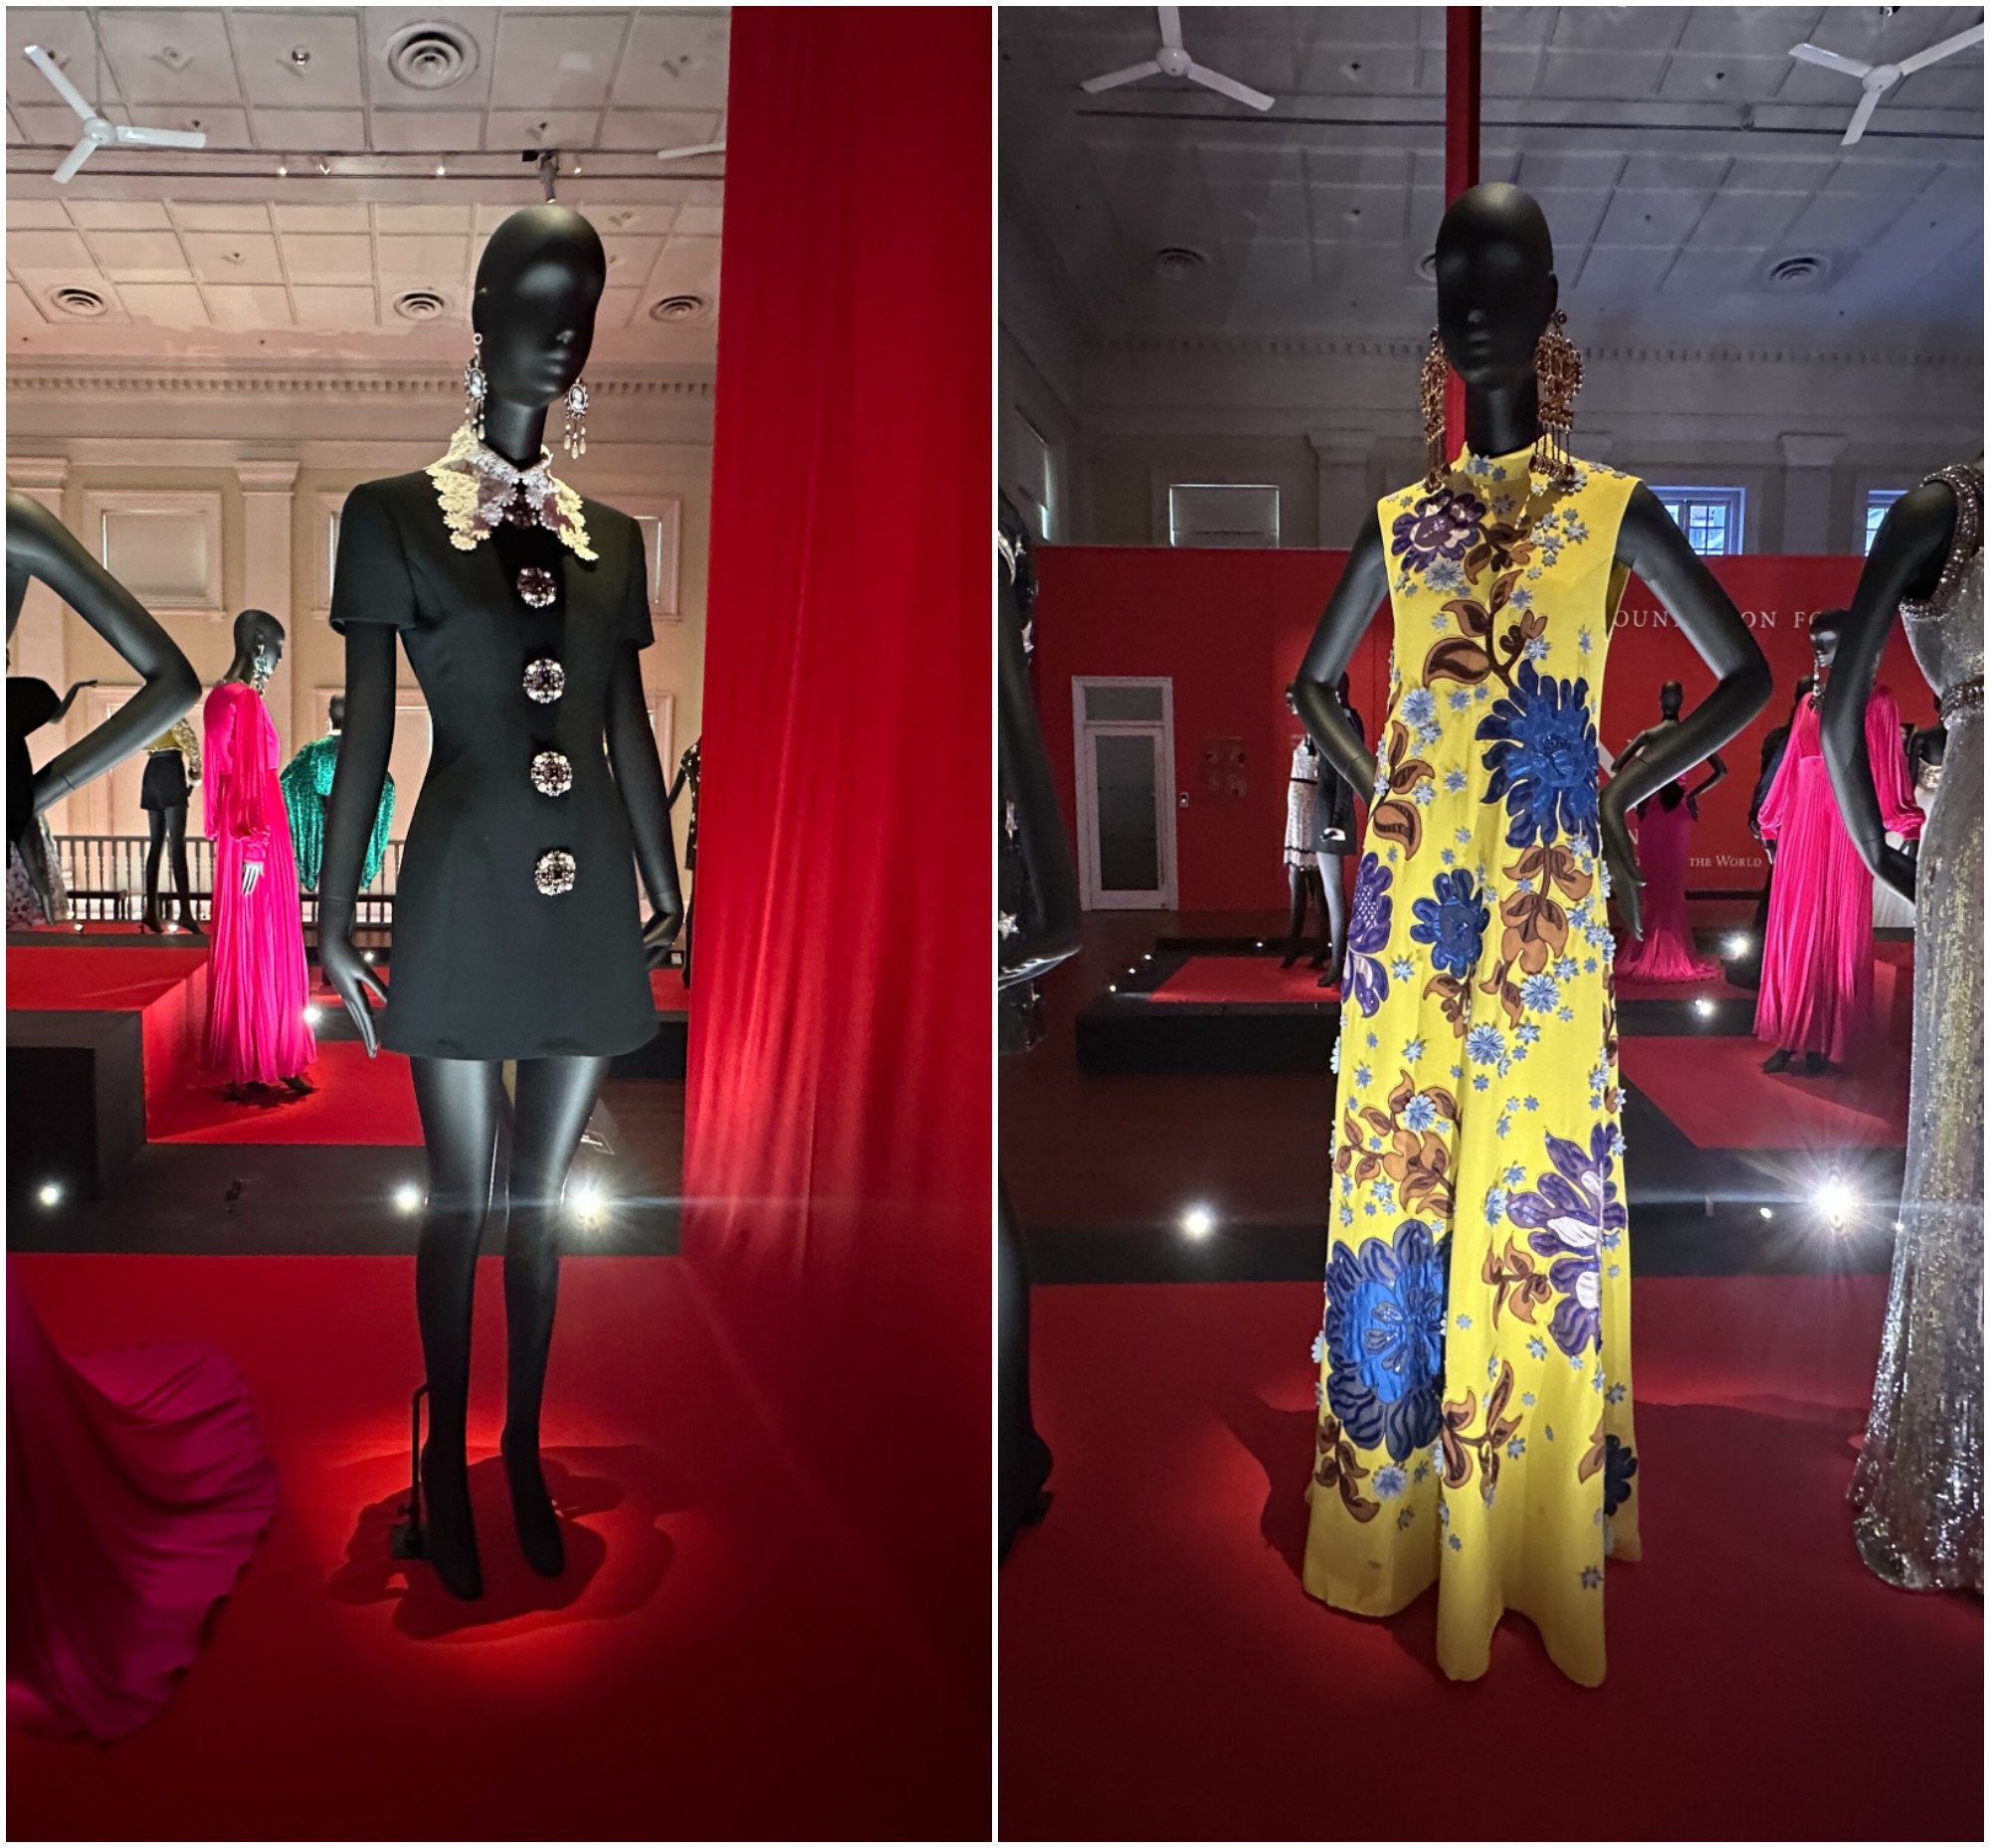  Left side: Black mini dress worn by Lady Gaga | Right side: Floral yellow gown worn by Zoe Tay